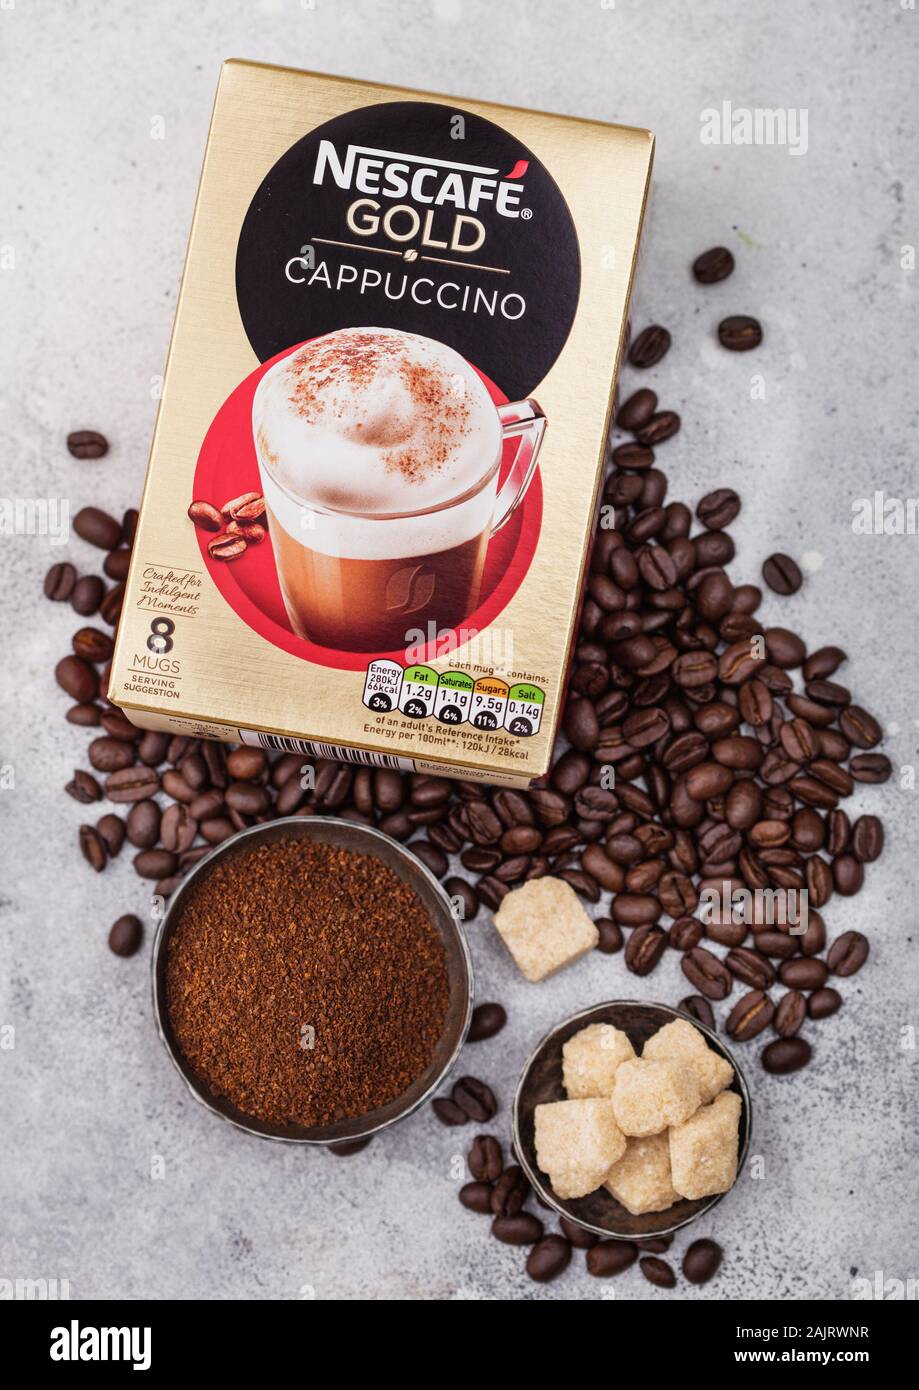 https://c8.alamy.com/comp/2AJRWNR/london-uk-august-15-2019-pack-of-nescafe-gold-cappuccino-with-coffee-beans-and-sugar-cubes-on-light-background-2AJRWNR.jpg